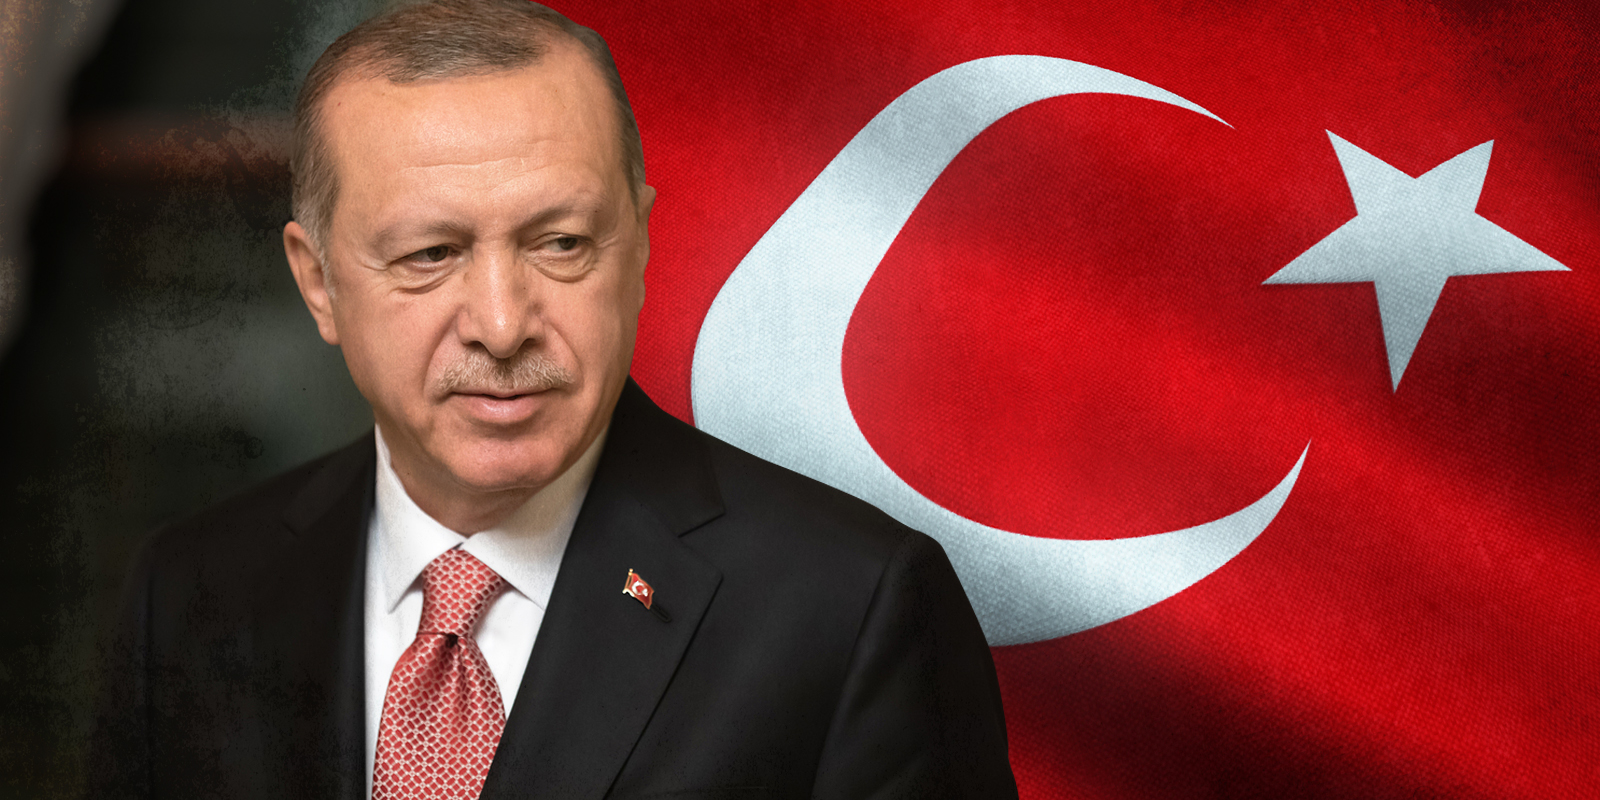 Erdogan and Brotherhood media: Seriousness in reconciliation with Egypt or maneuver?